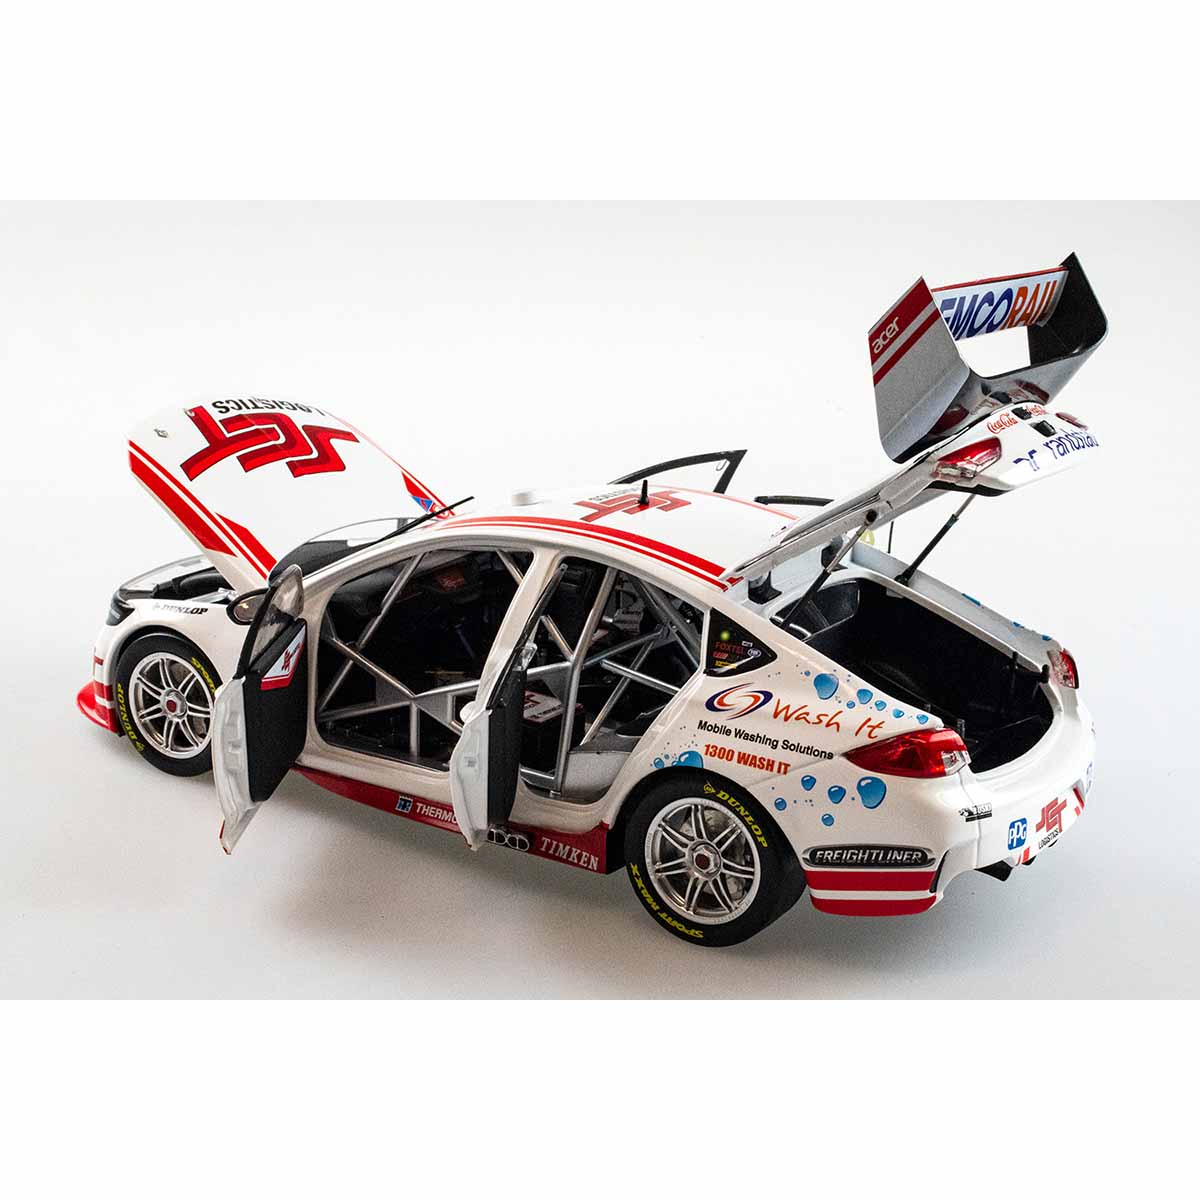 HOLDEN ZB COMMODORE - BJR SCT LOGISTICS -  JACK SMITH #4 - 2021 Mount Panorama 500 Race 1 - 1:18 Scale Diecast Model Car